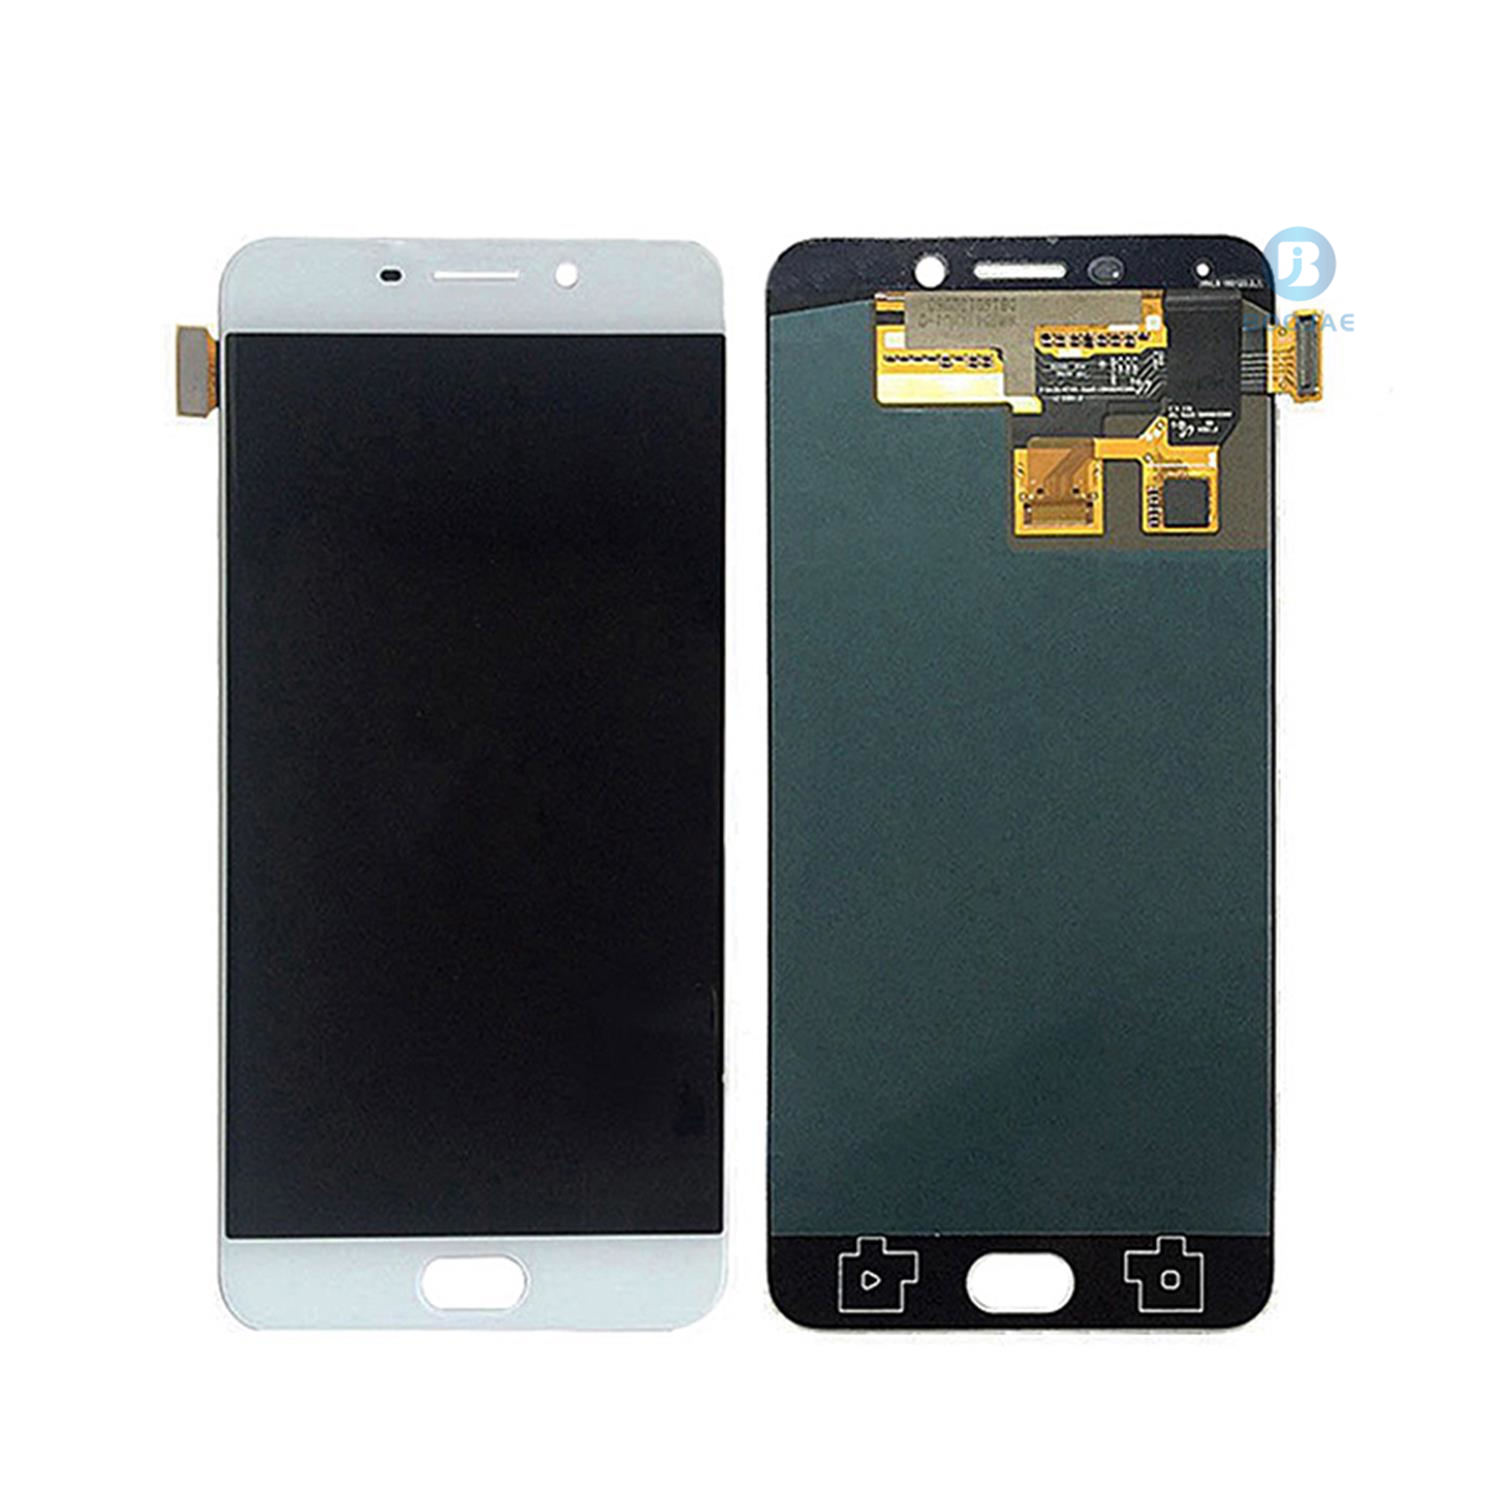 For OPPO R9 Plus LCD Screen Display and Touch Panel Digitizer Assembly Replacement